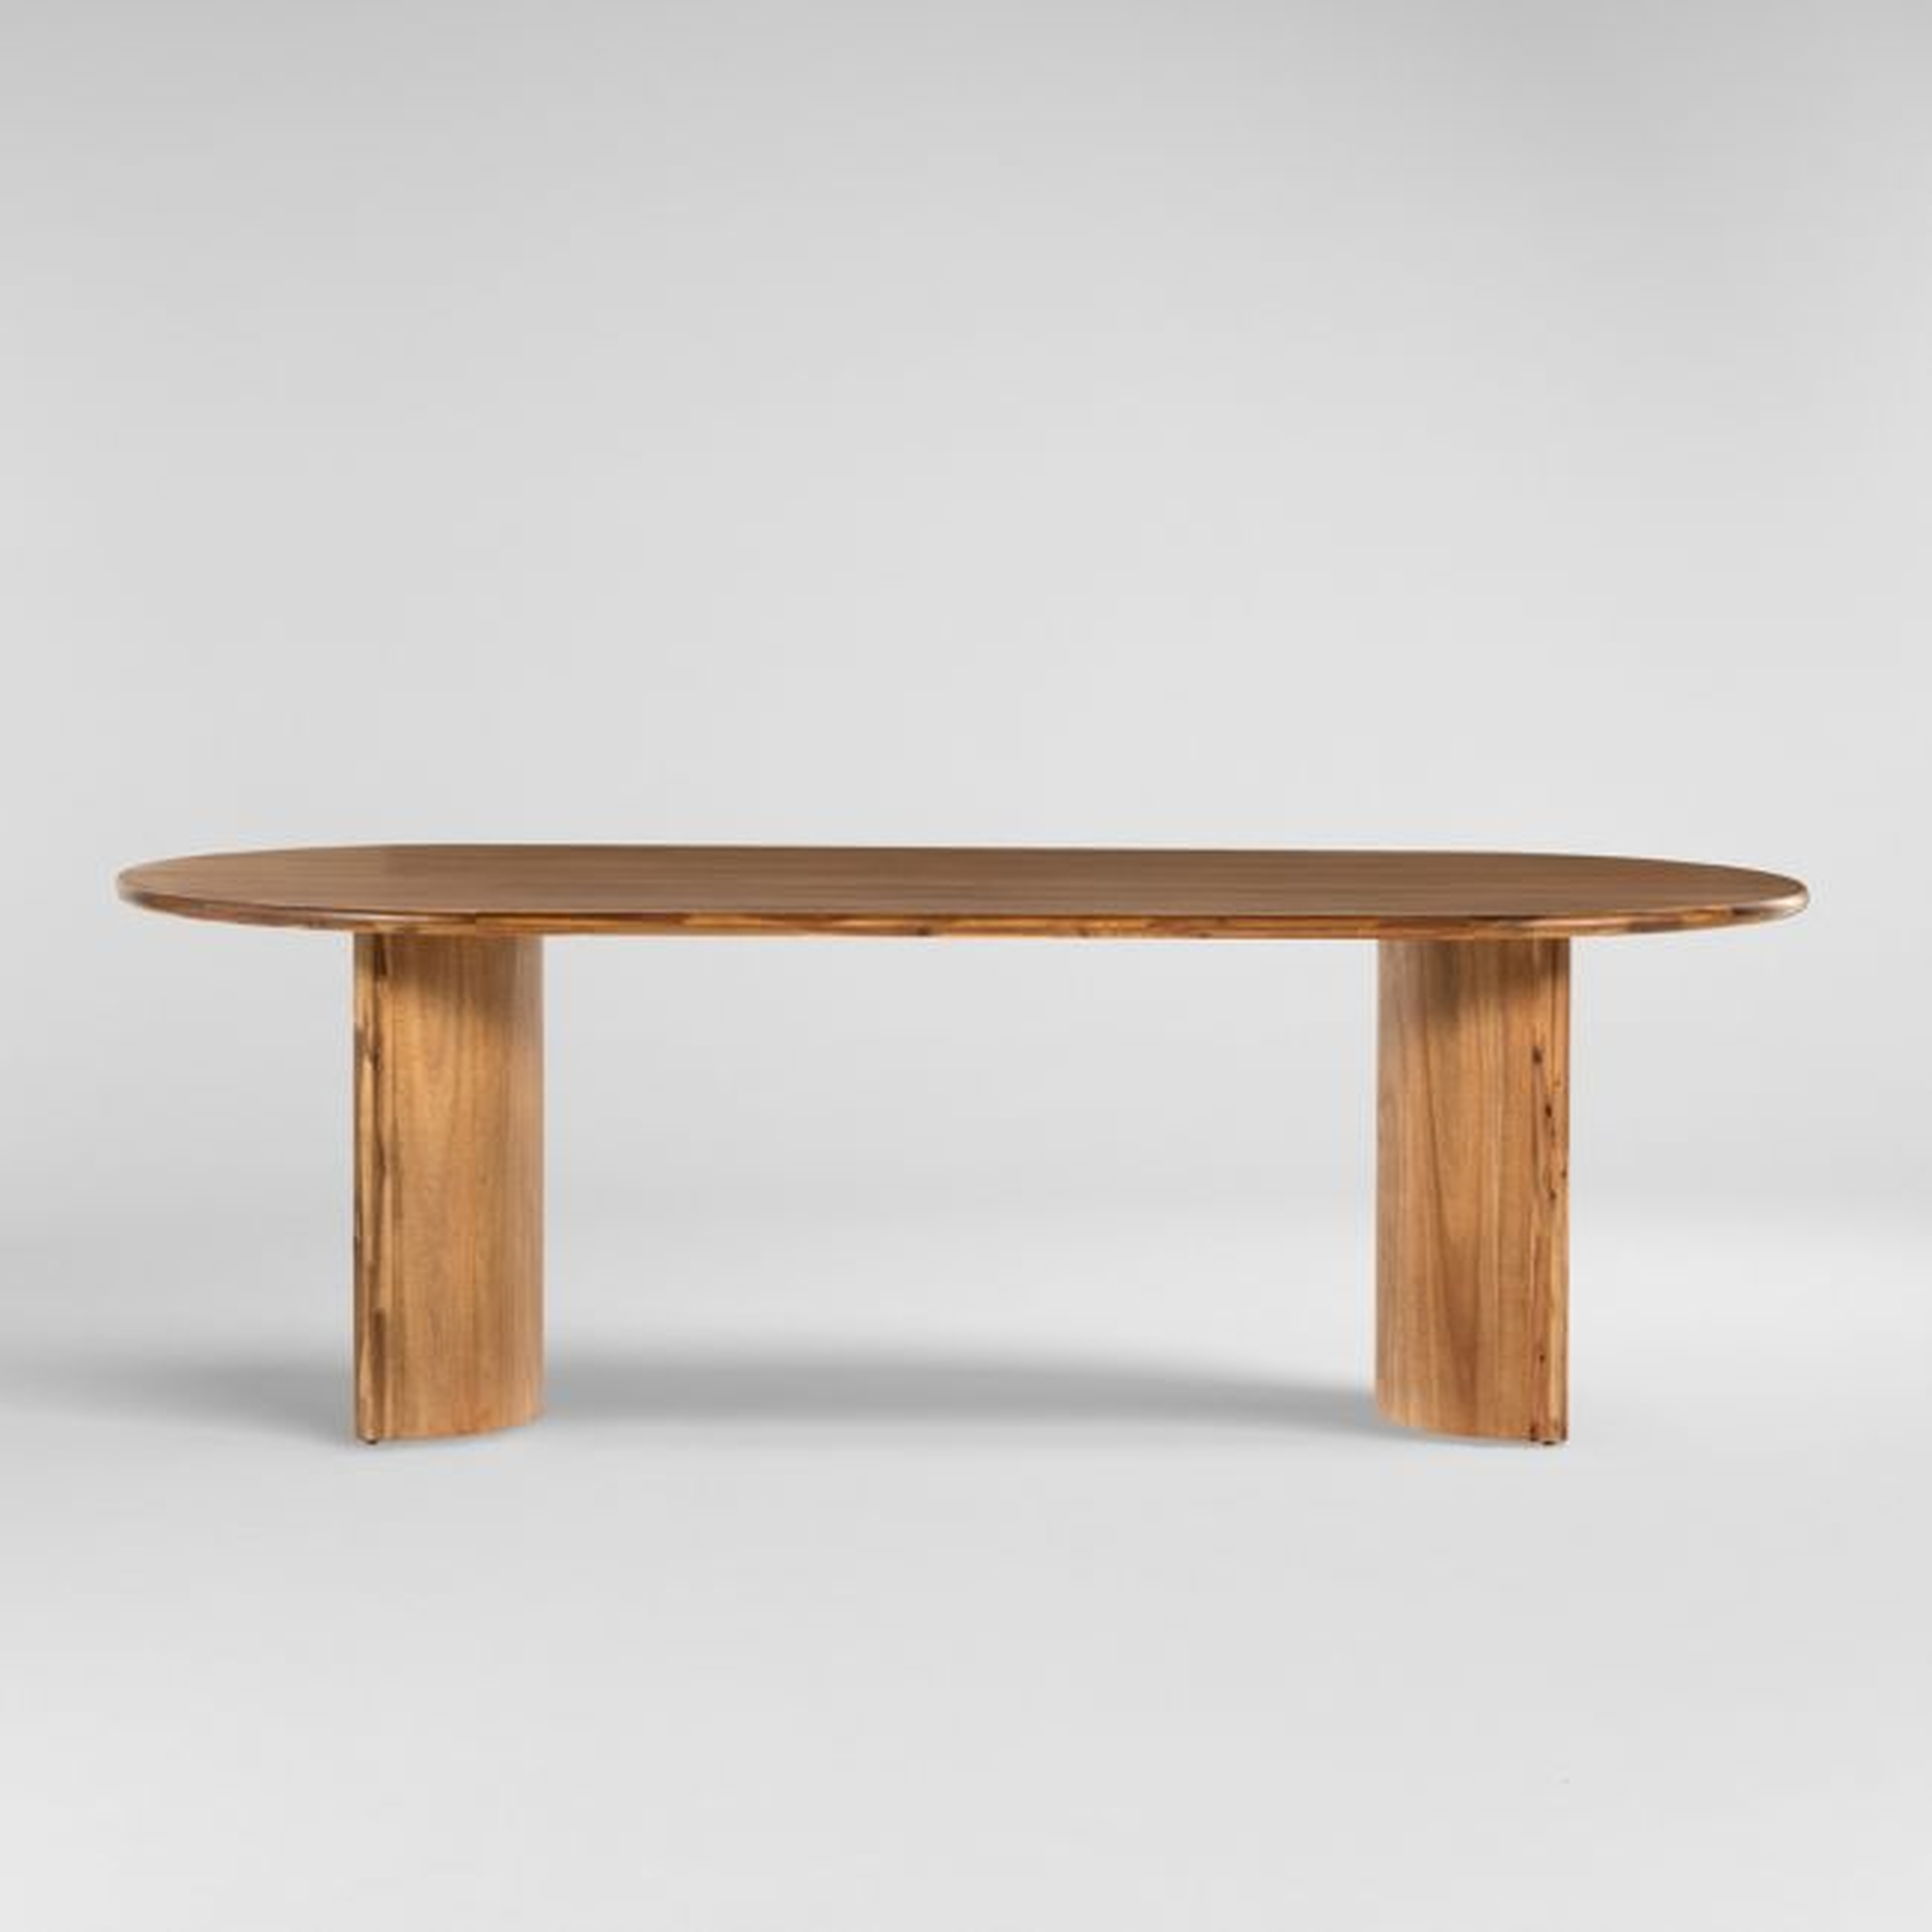 Panos Sandy Acacia Wood Dining Table - Crate and Barrel